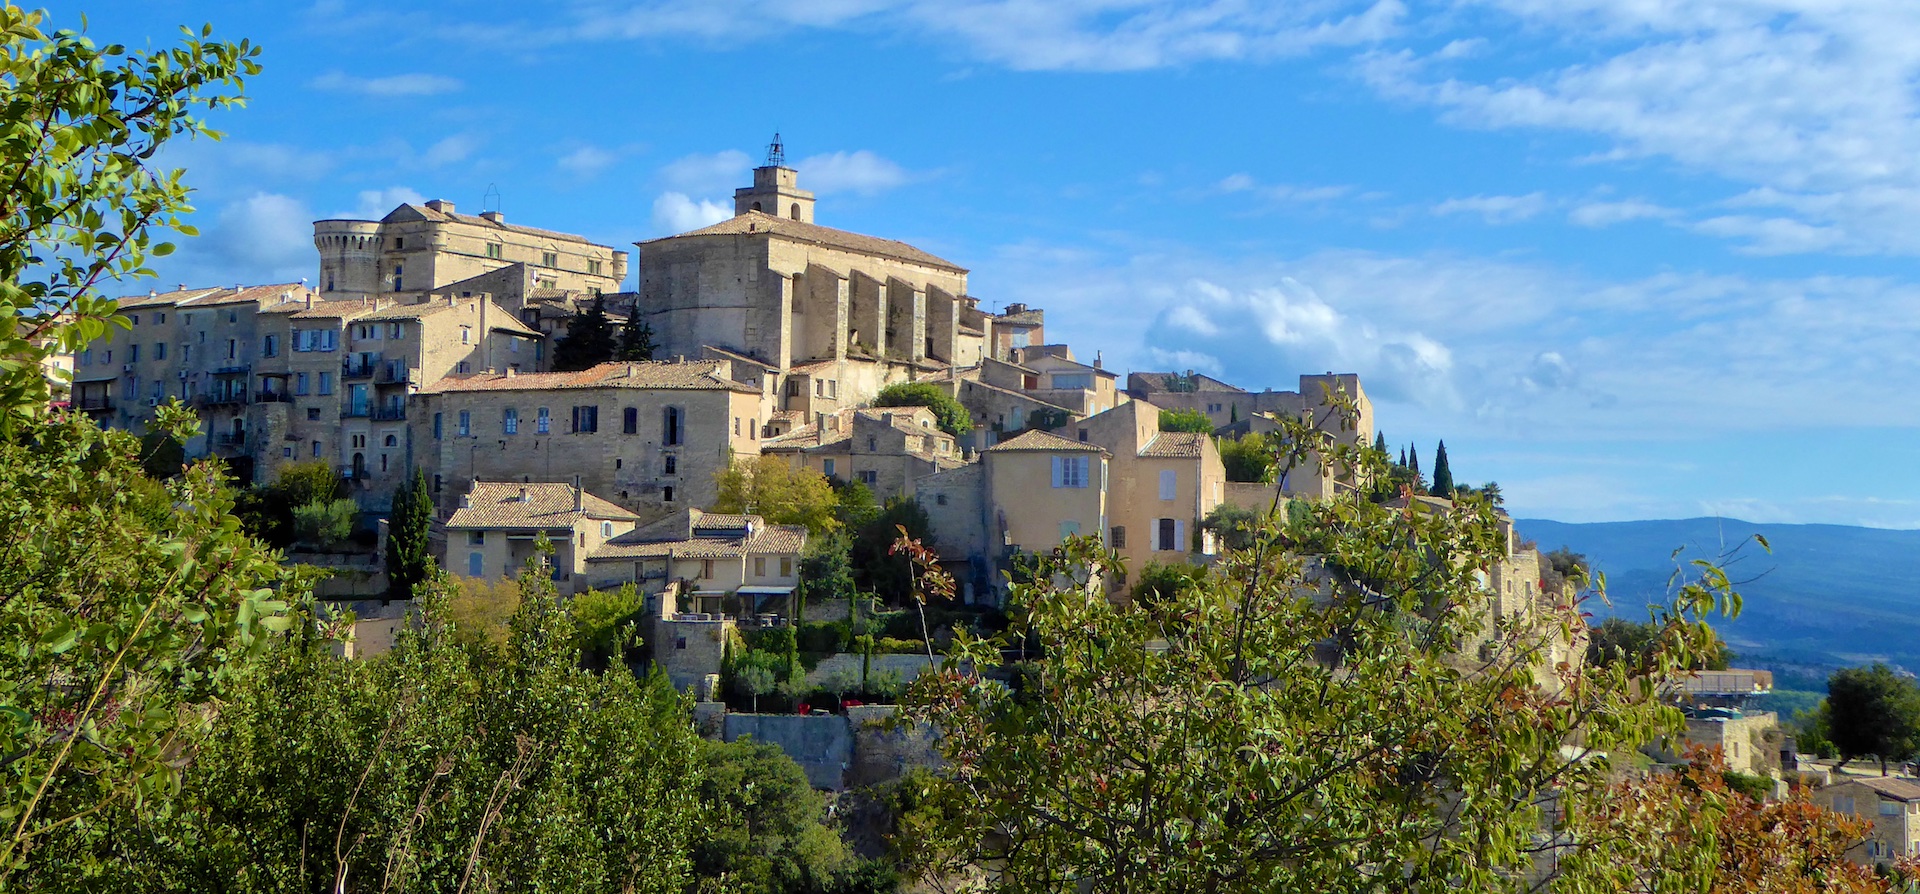 Gordes, the most splendid perched village in the Luberon, Provence